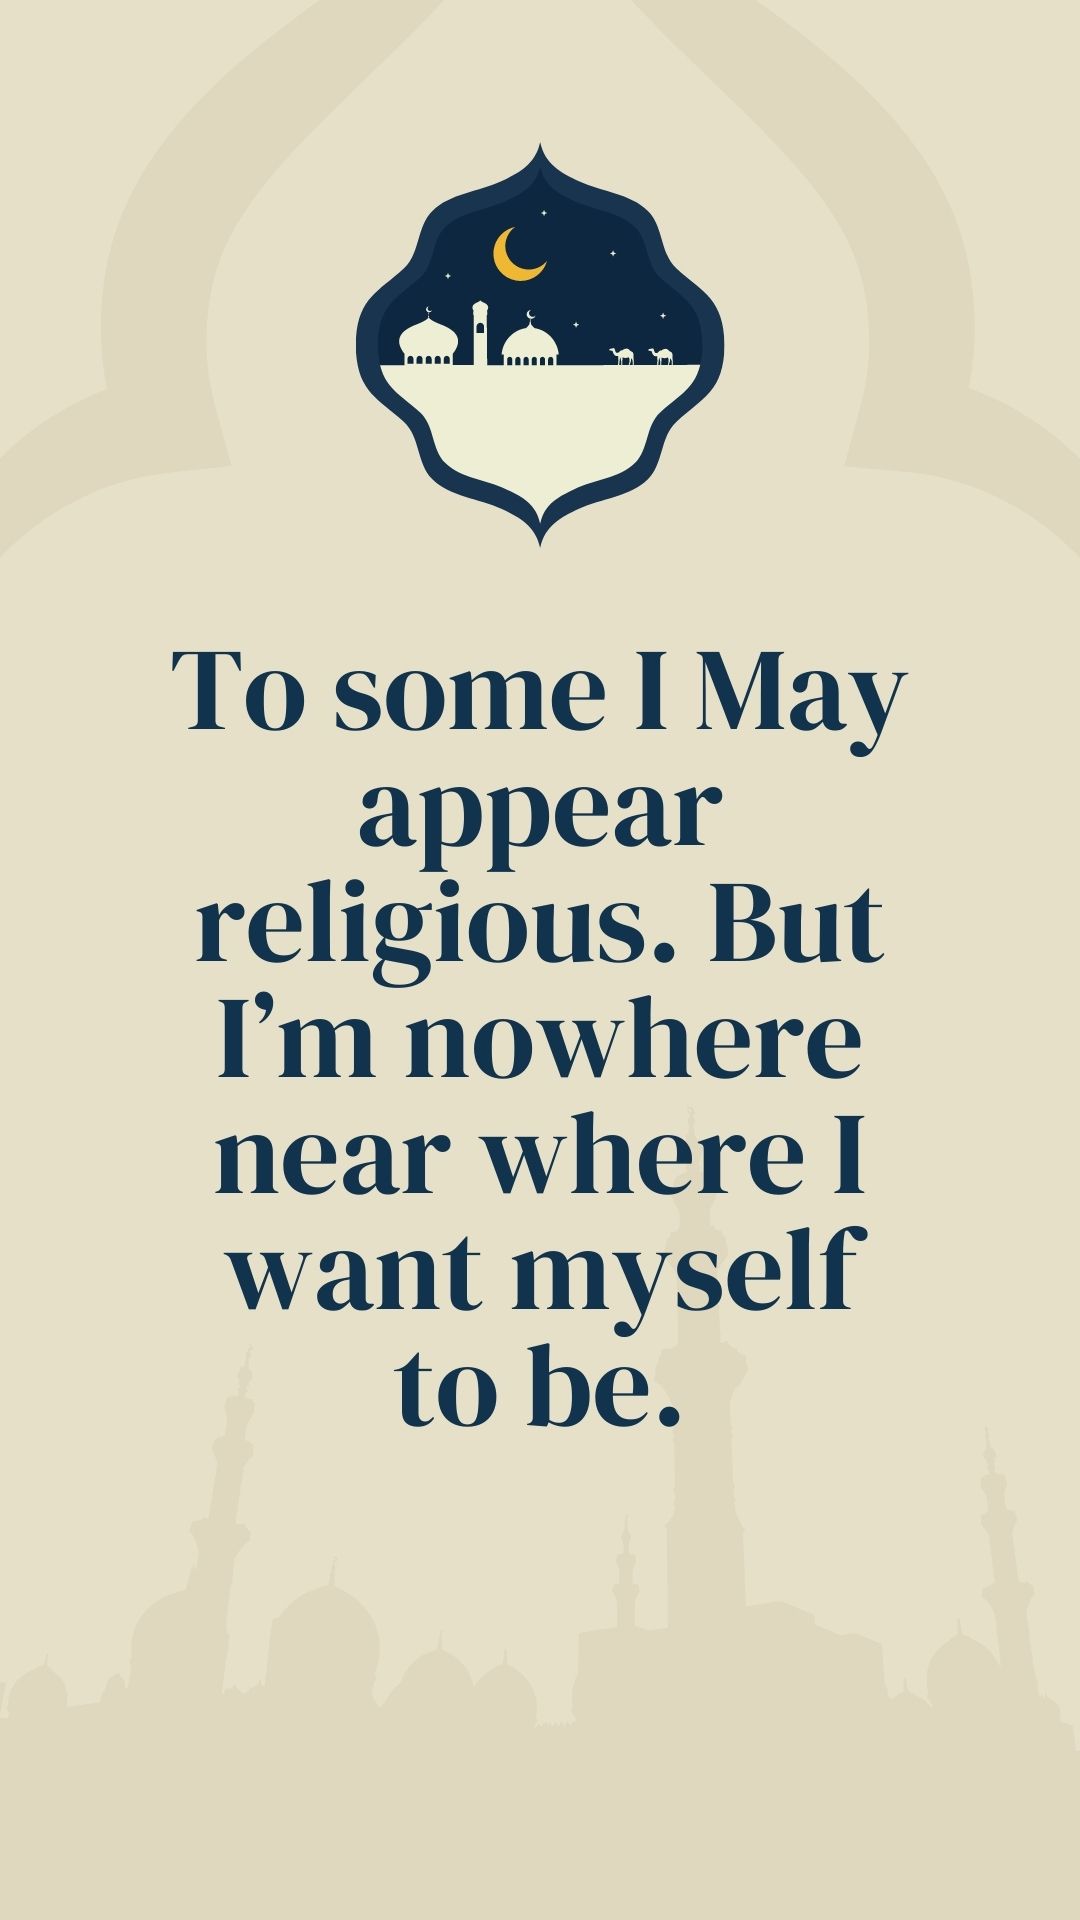 To some I May appear religious. But I’m nowhere near where I want myself to be.